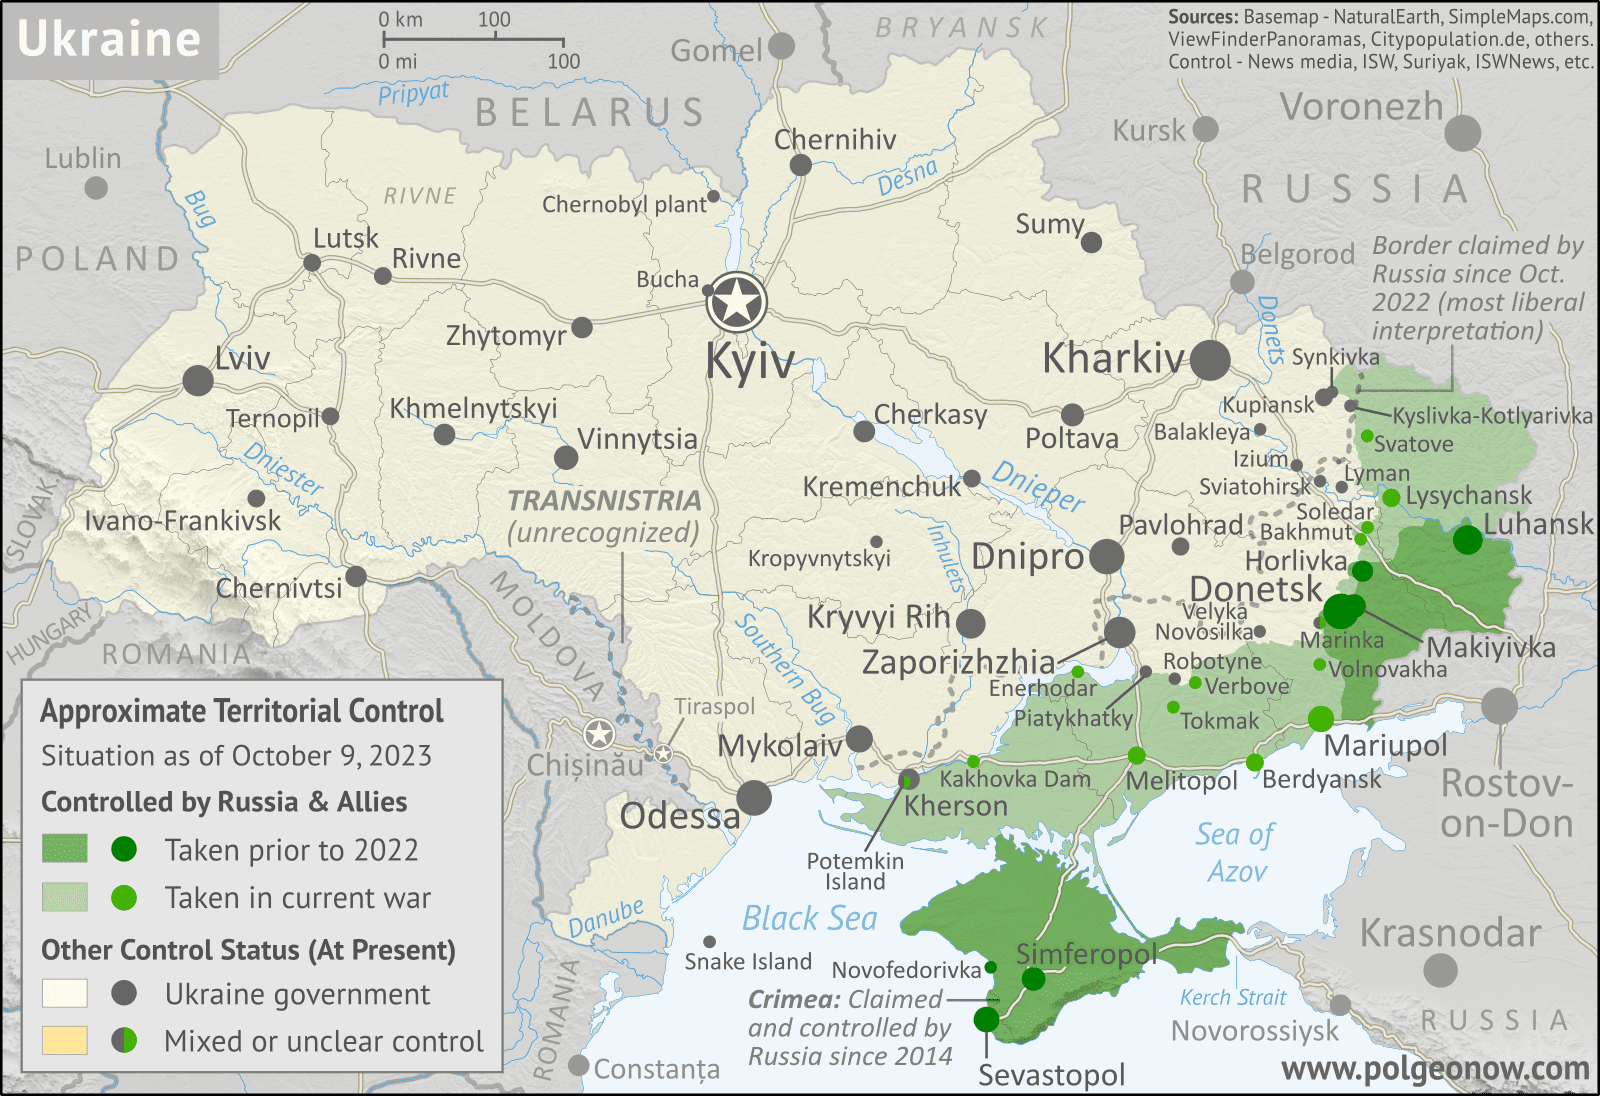 Map of Russian-controlled territory in Ukraine on October 9, 2023. In addition to the Crimean peninsula, which Russia had already seized in 2014, and parts of the far eastern Donetsk and Luhansk provinces (the Donbas region) already controlled by Russia-backed separatist rebels (and formerly declared independent as the Donetsk and Lugansk People's Republics), Russian forces still controlled a wide belt of territory just north of Crimea, including large parts of Kherson and Zaporizhzhia provinces, as well as large additional areas of Donetsk and Luhansk provinces. Meanwhile, all of those provinces are now claimed by the Russian government as parts of Russia, creating a new claimed international border through what was until recently undisputed eastern Ukraine. From August to October 2023, Ukraine made some small advances, capturing two or three significant towns from Russian forces. Map includes key locations from the news, such as Robotyne, Synkivka, Sevastopol, Verbove, and more. Colorblind accessible.